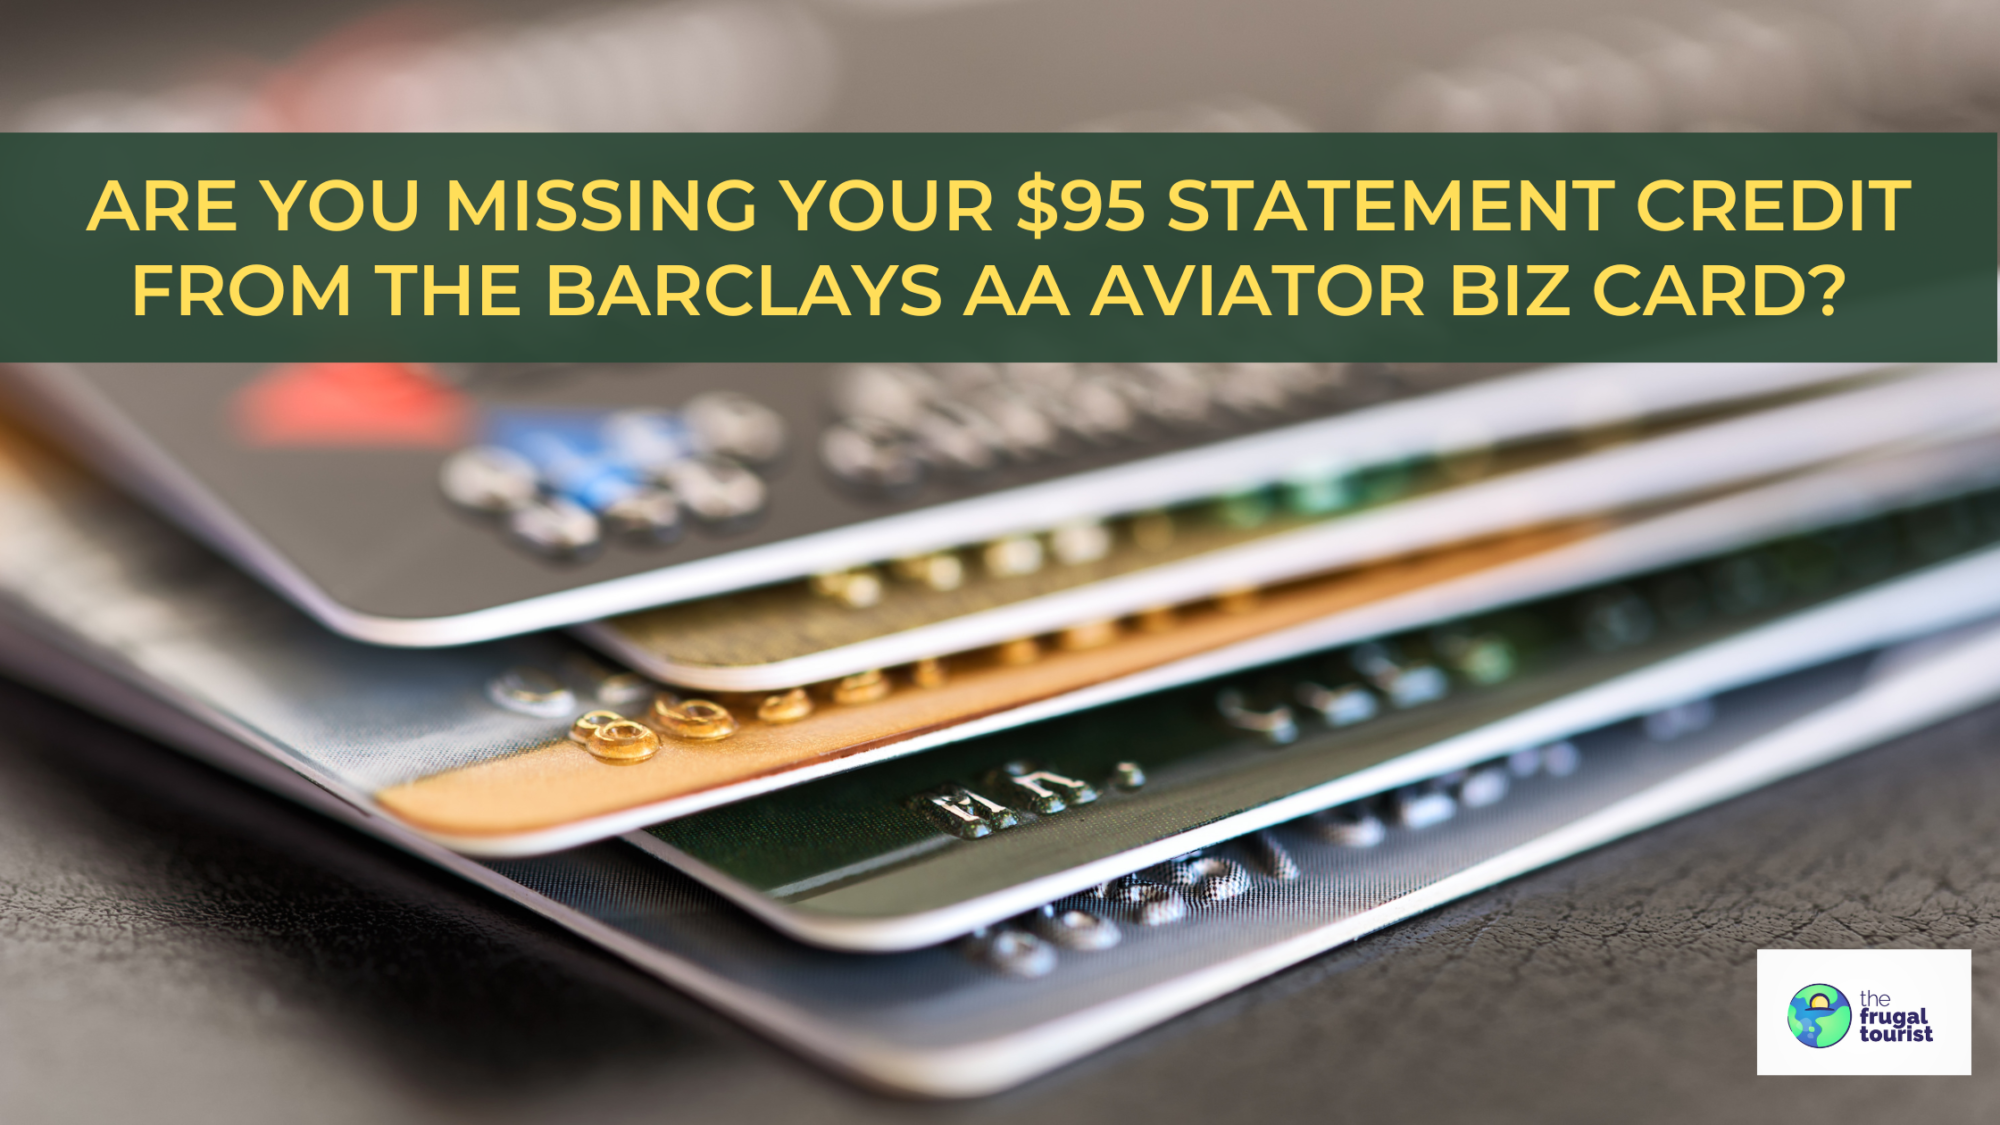 Are You Missing The $95 Credit from the Barclays AAdvantage Aviator Business Card?